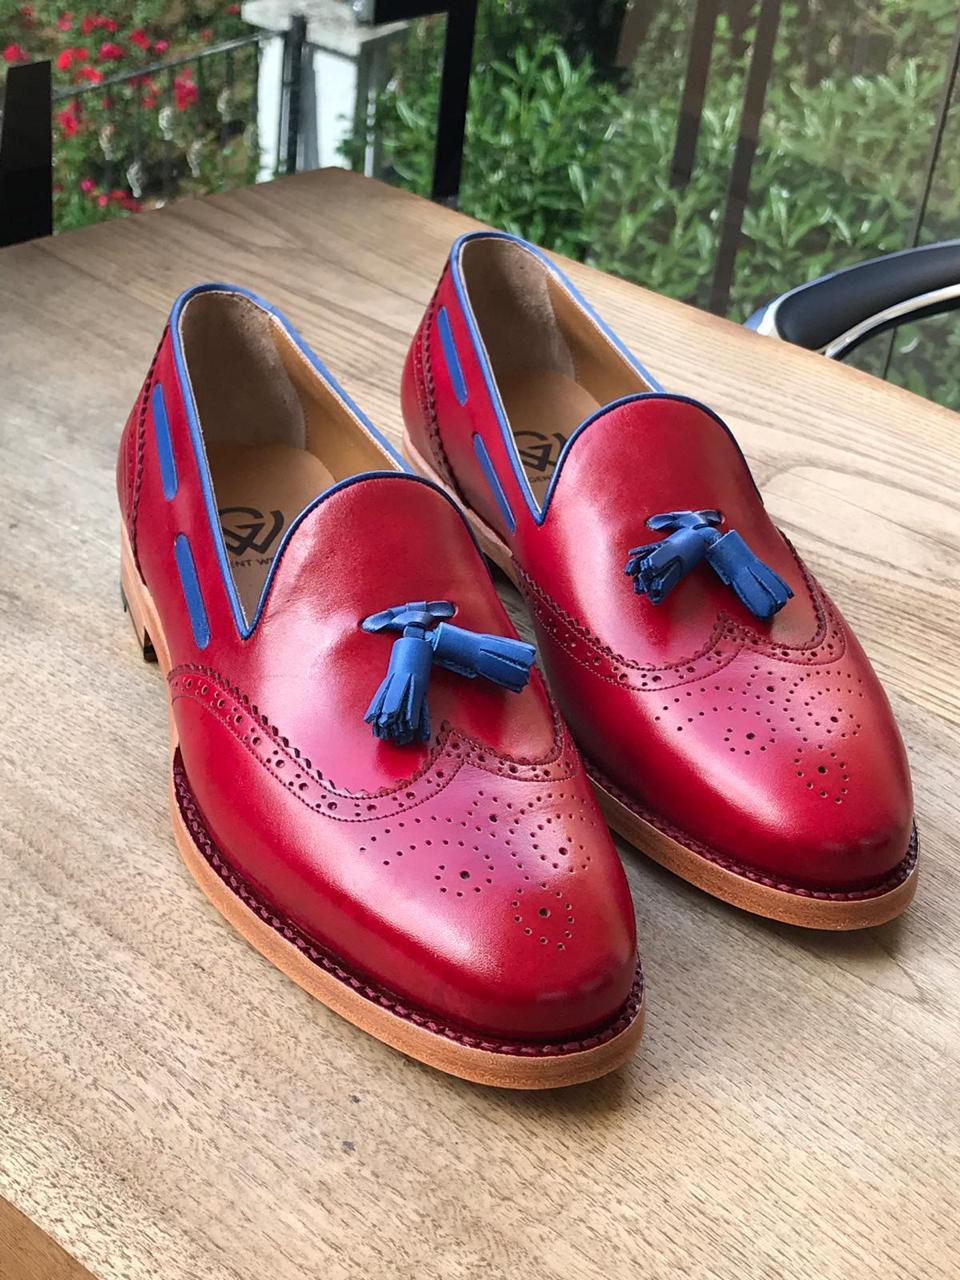 Buy Red Bespoke Tassel Loafer by Gentwith.com with Free Shipping